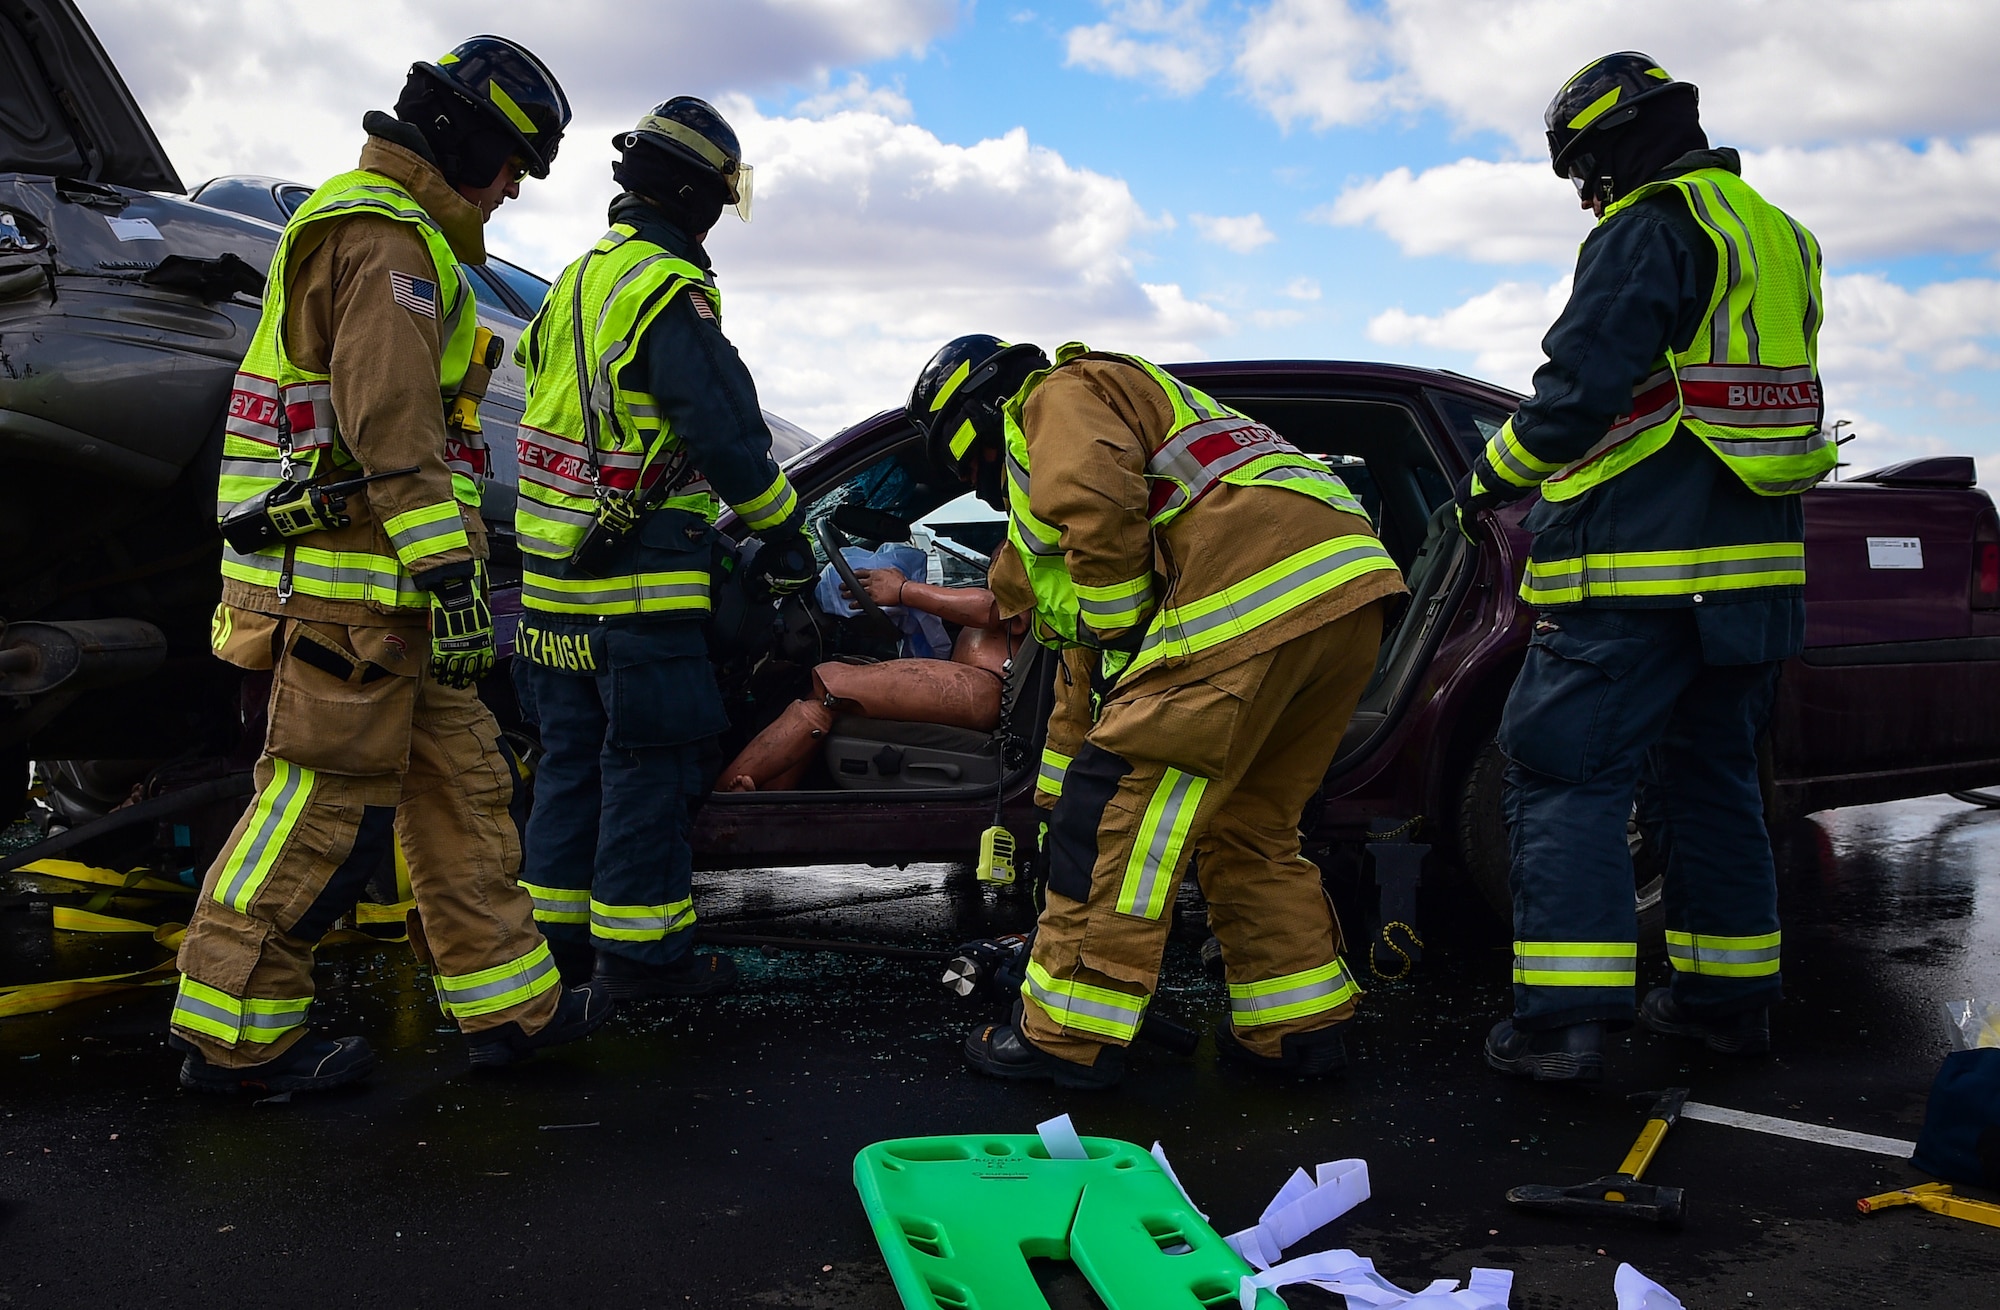 Four firefighters from the 460th Civil Engineer Squadron practice saving a rescue mannequin from a simulated major vehicle accident during an auto extraction exercise on Buckley Air Force Base, Colo., Feb. 24, 2021.